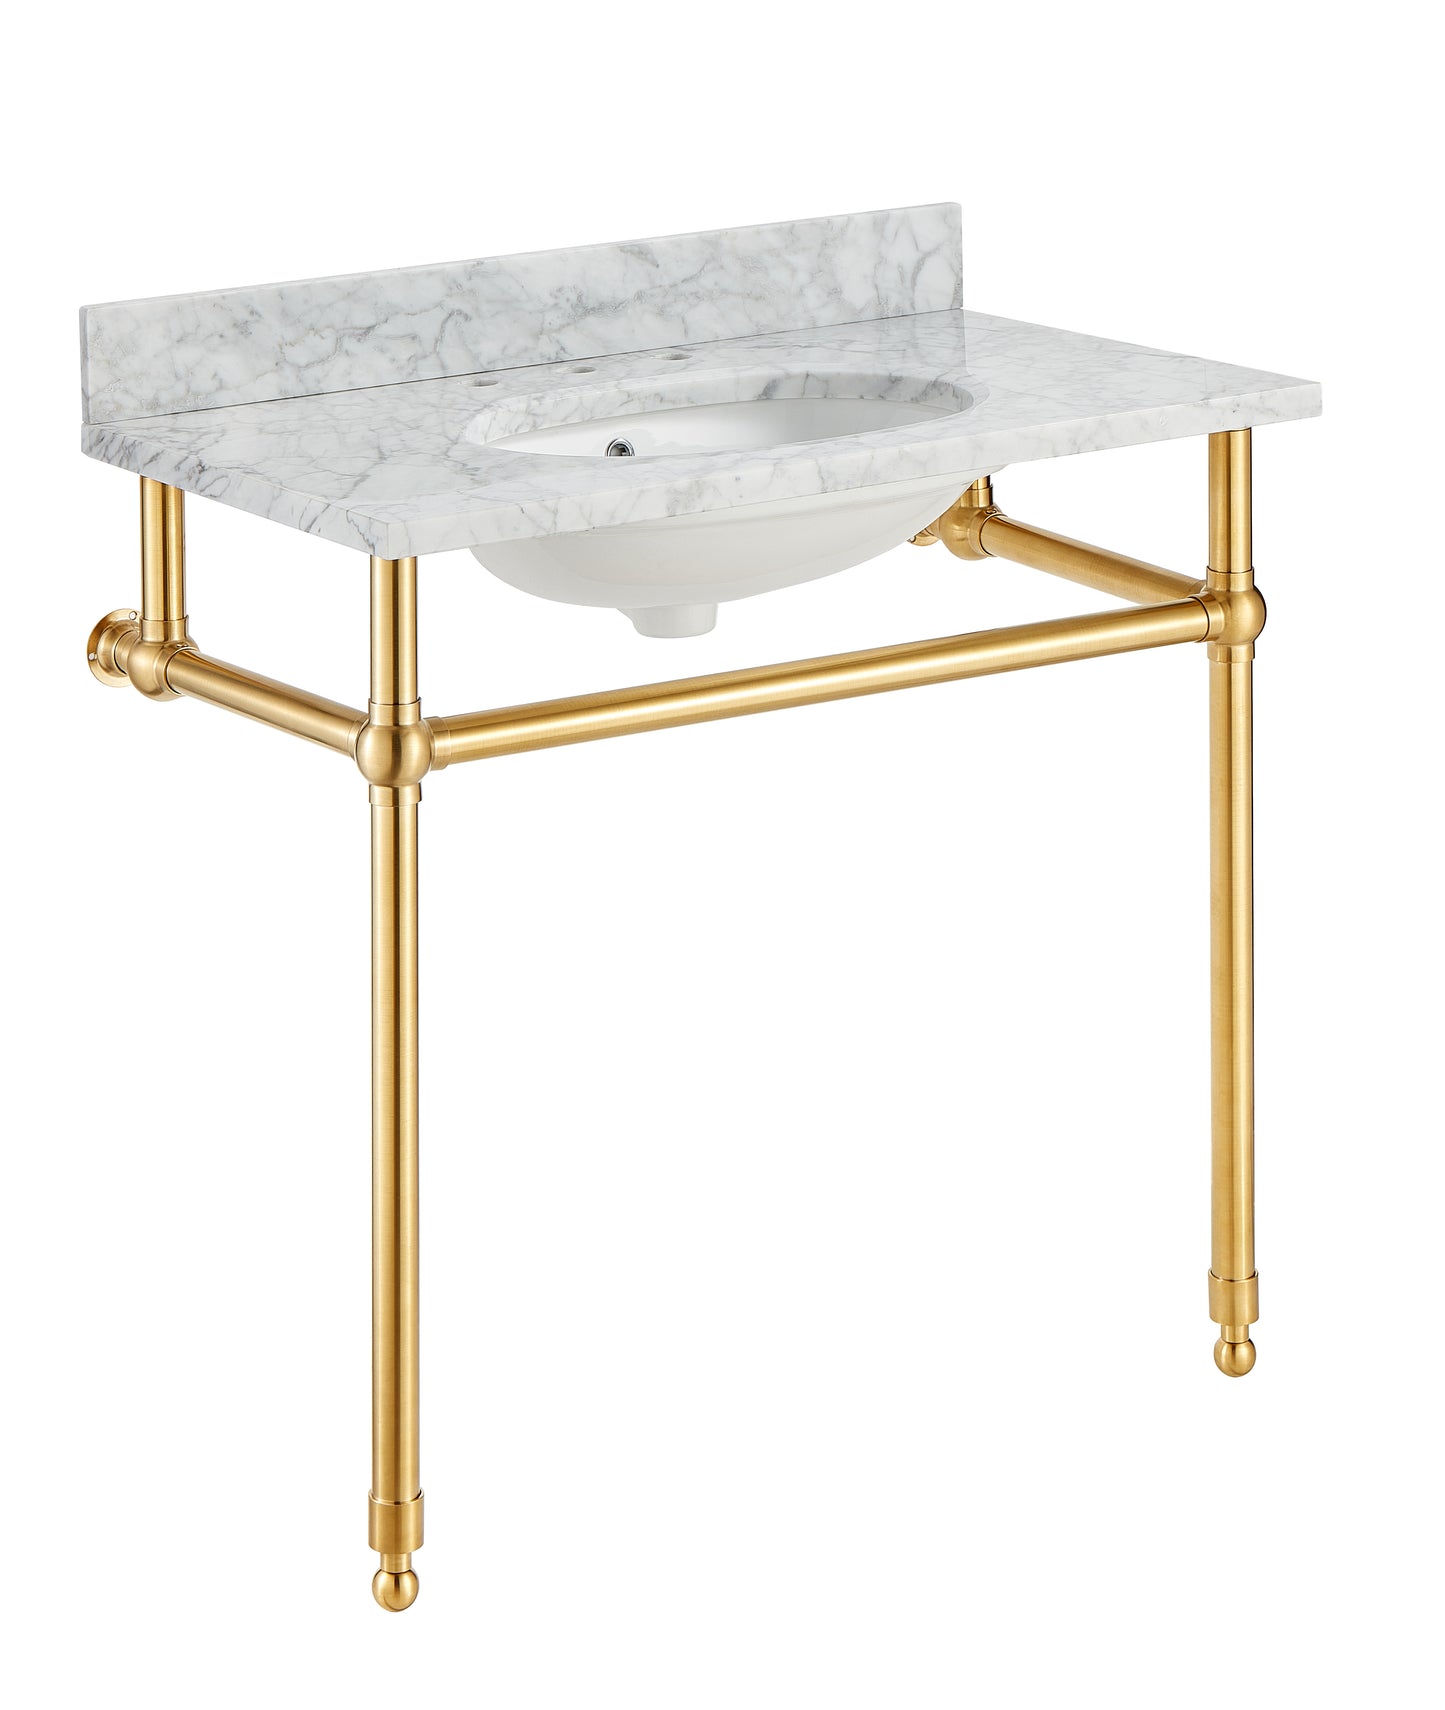 CS-FGC004-BG - Verona 34.5 in. Console Sink in Brushed Gold with Carrara White Counter Top